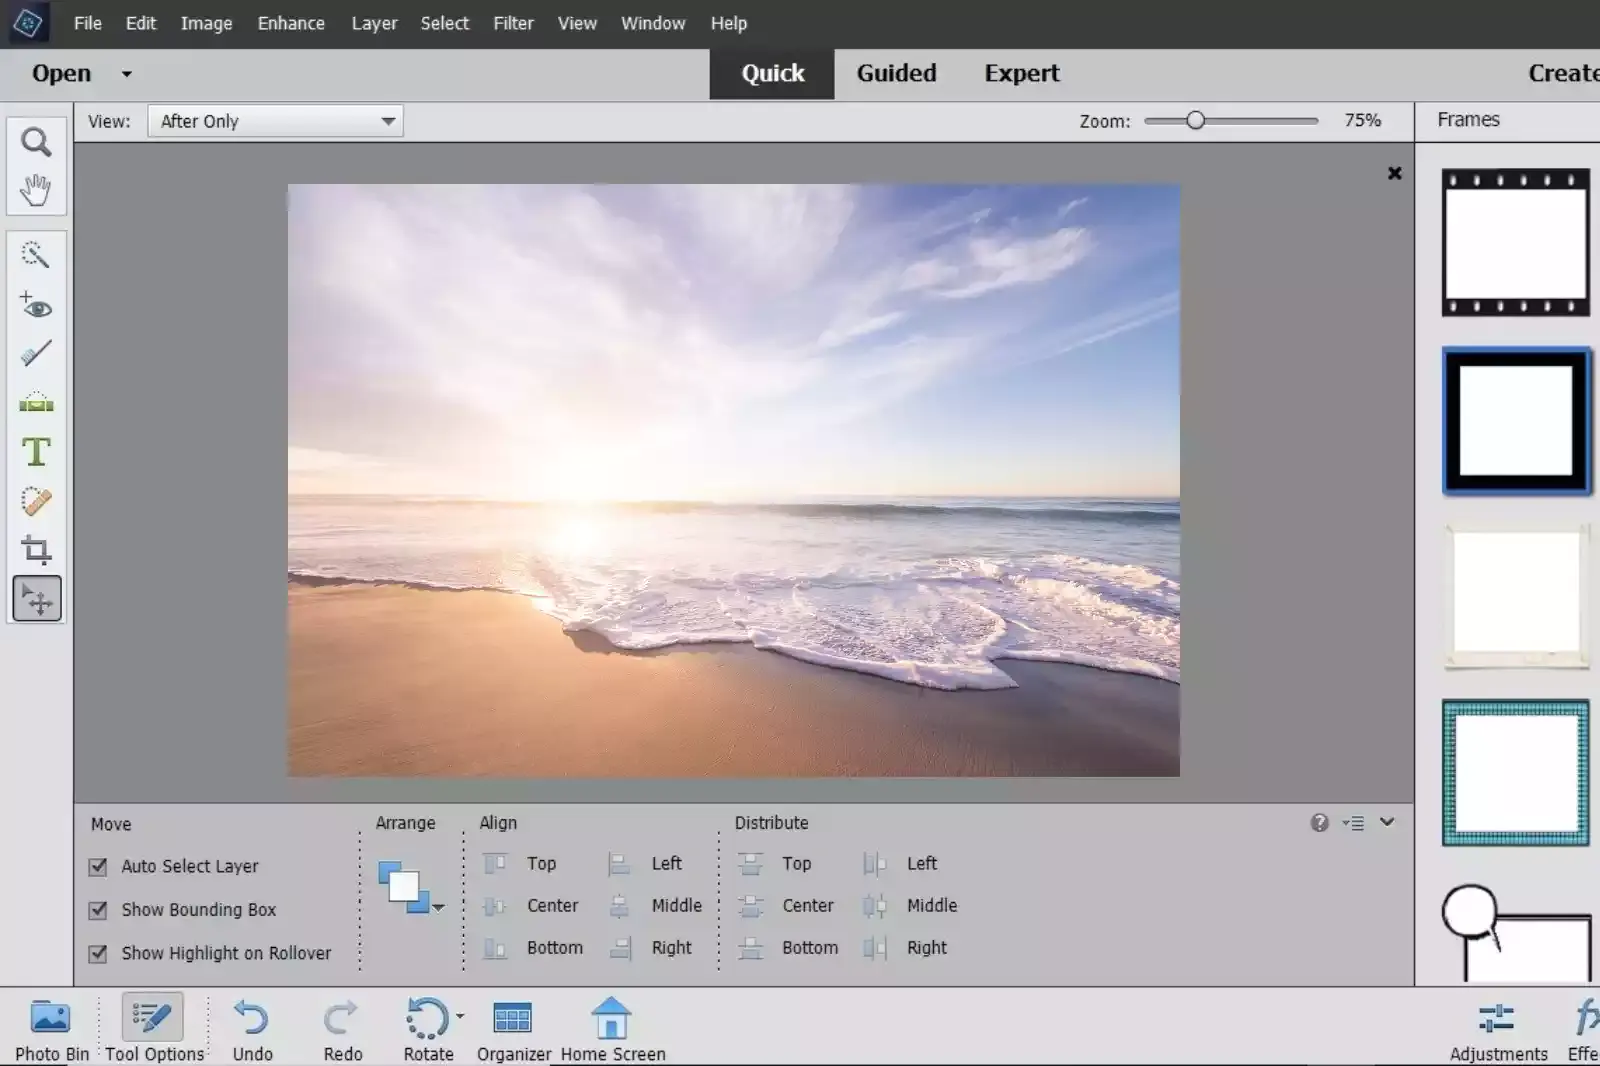 Home Page of Adobe Photoshop Elements